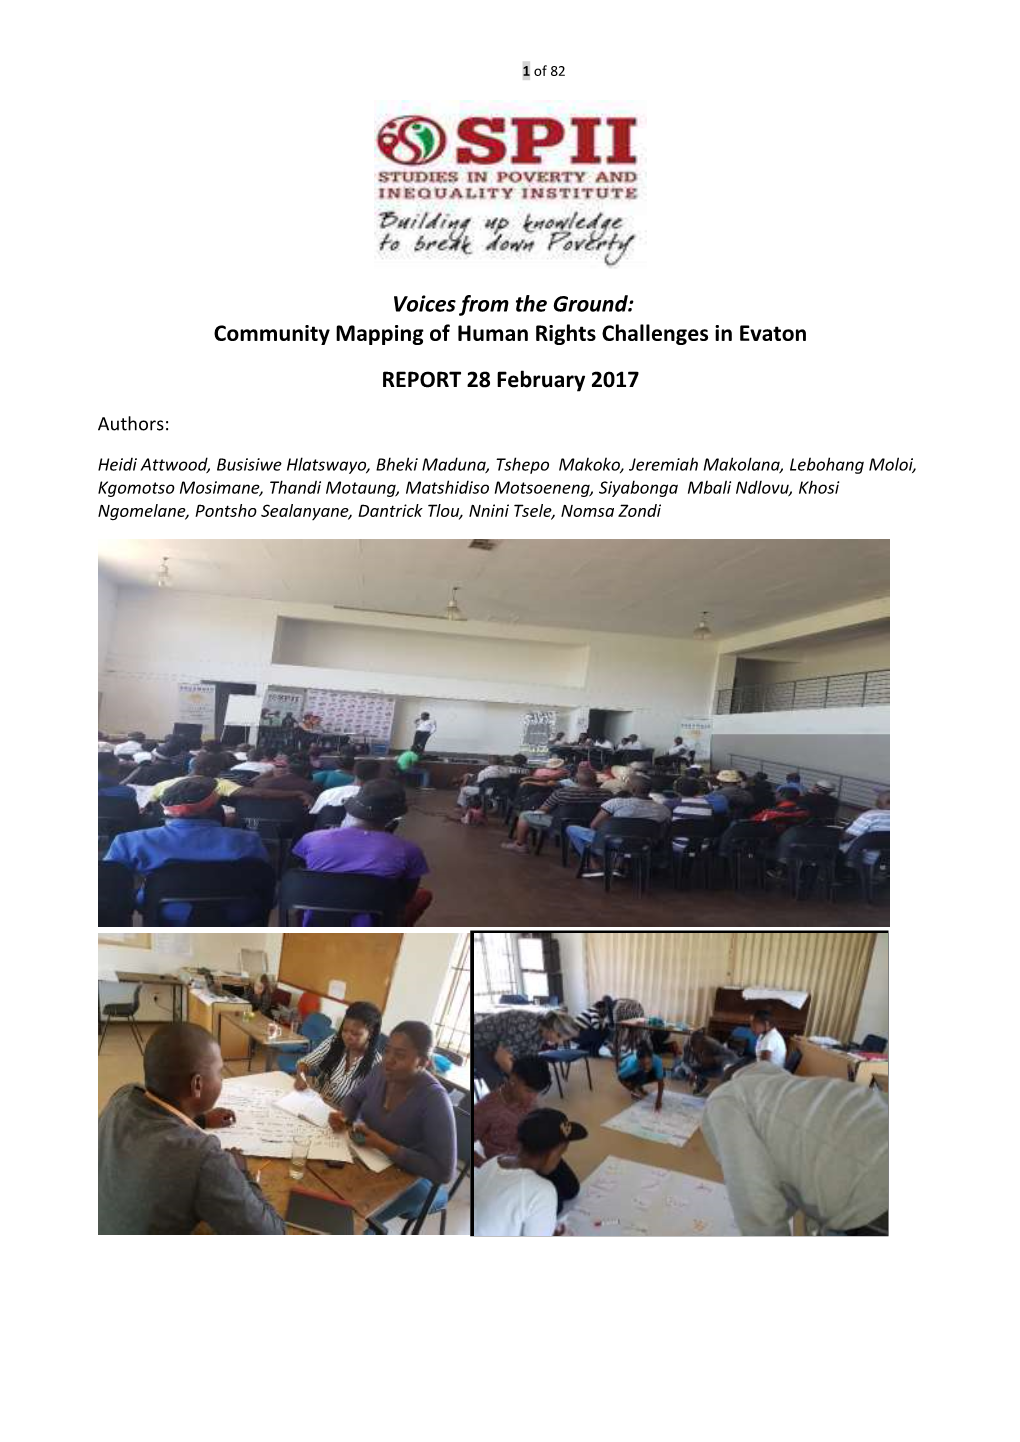 Community Mapping of Human Rights Challenges in Evaton REPORT 28 February 2017